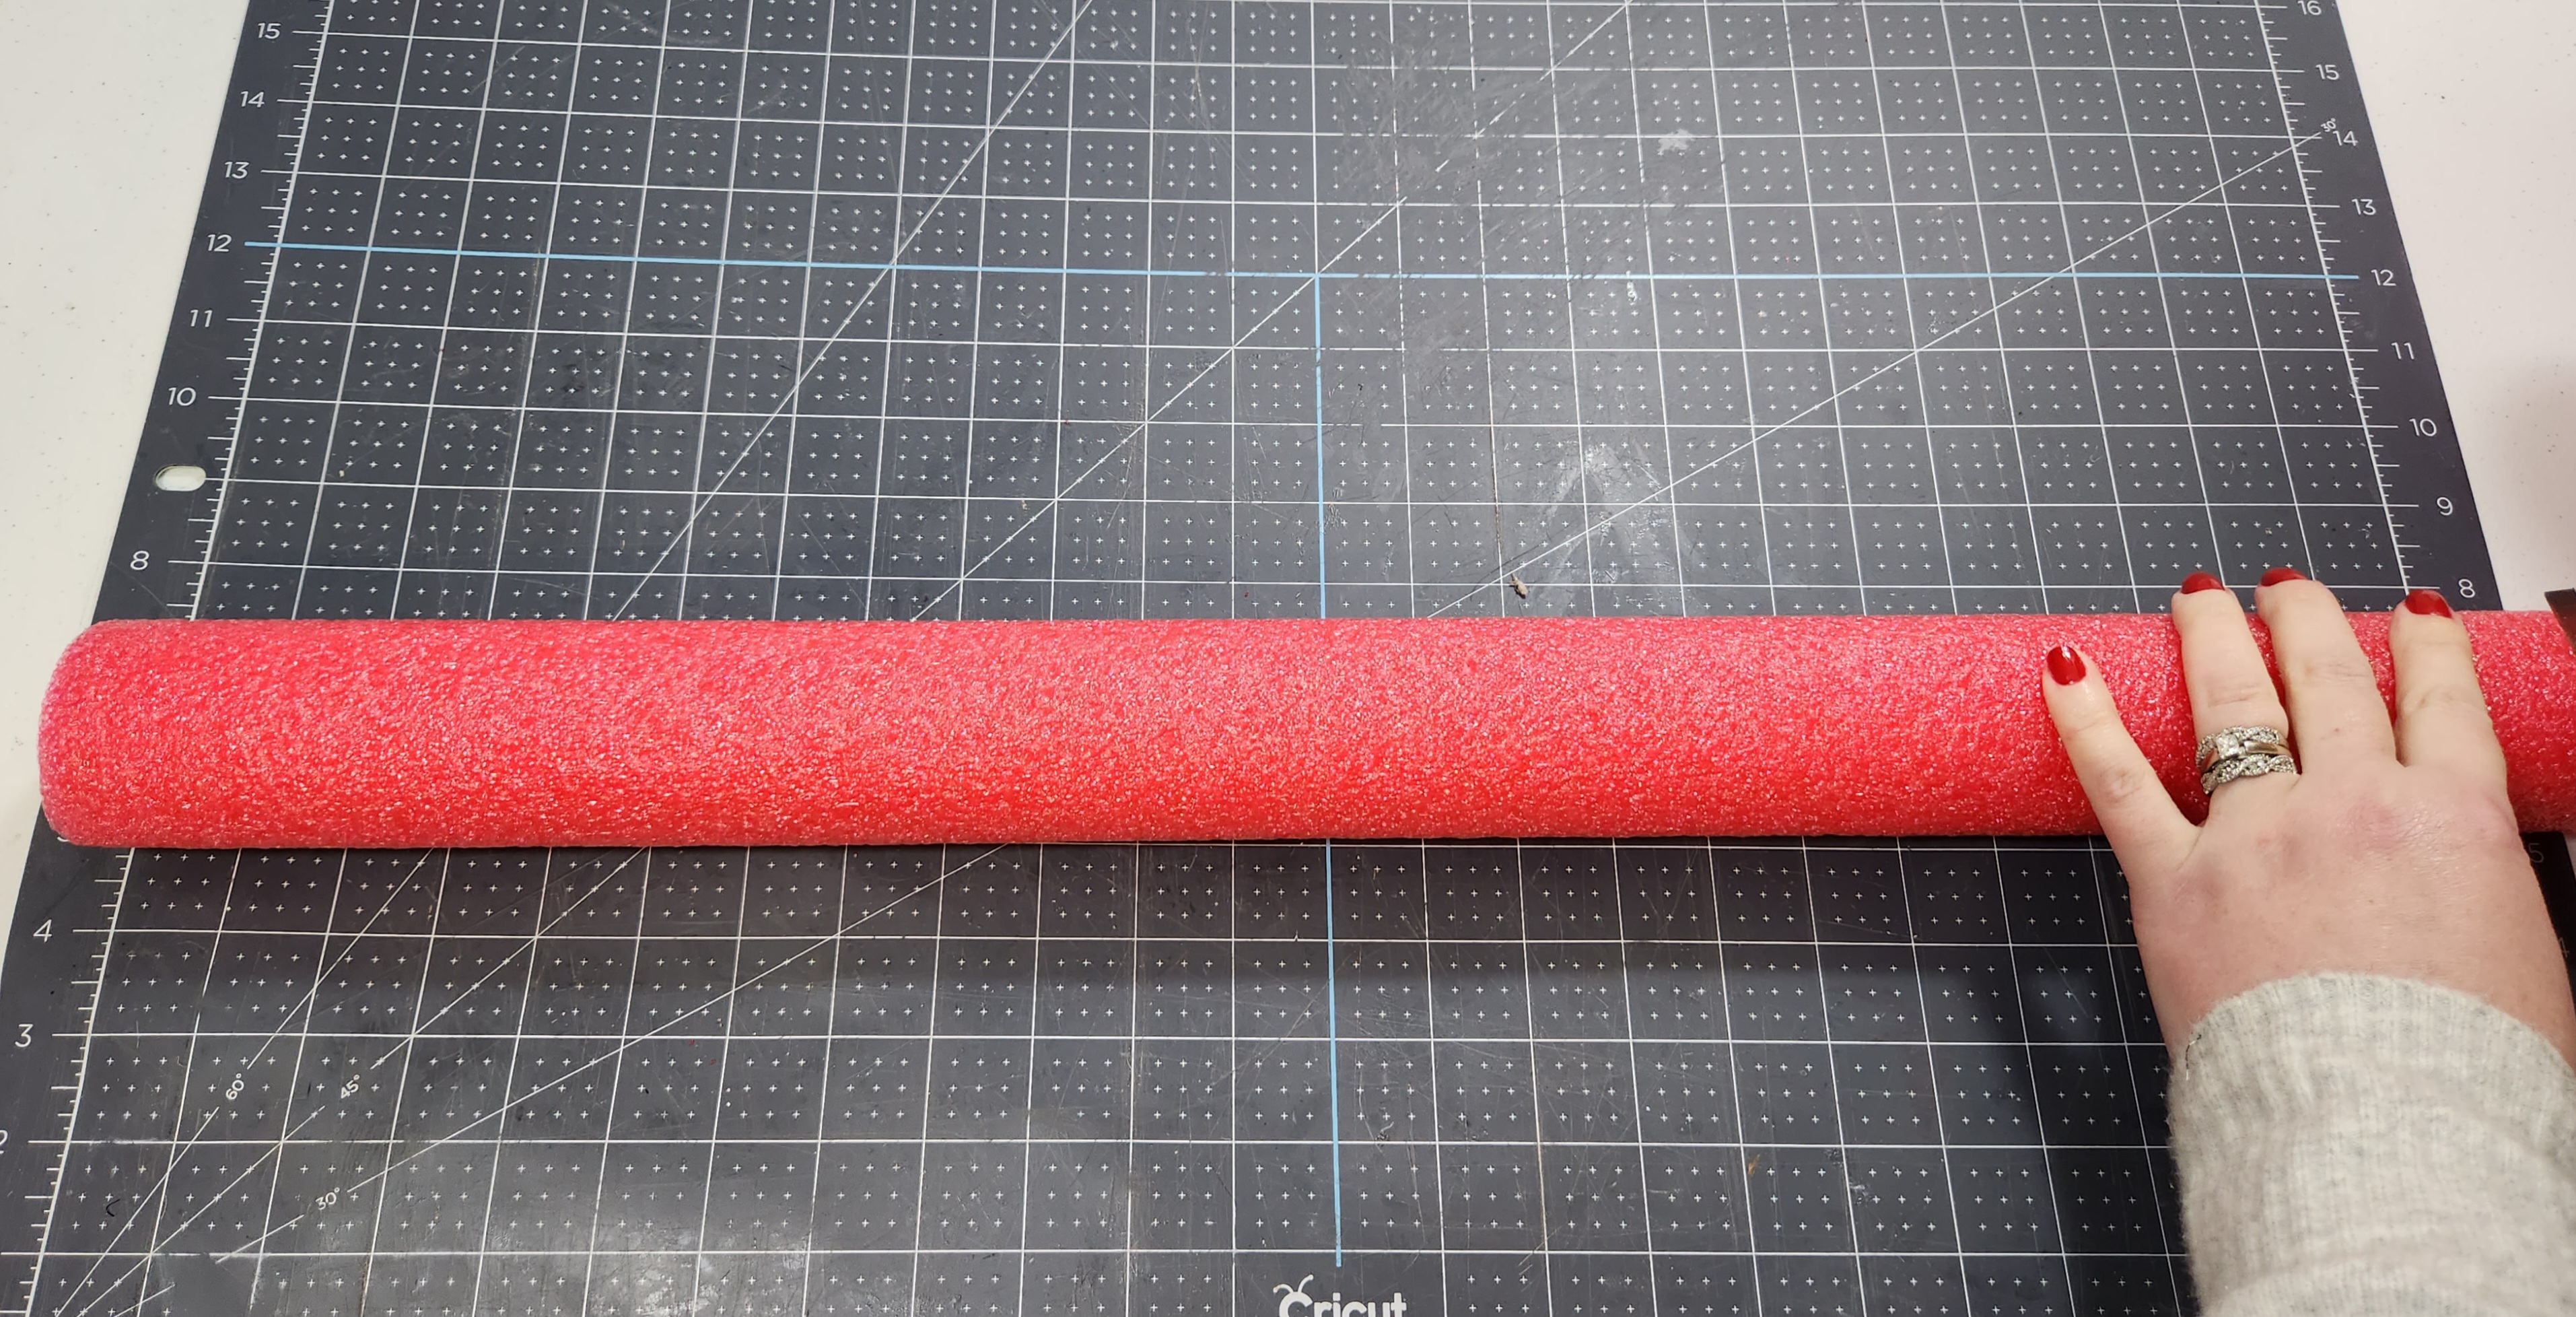 Cutting a pool noodle to 24" long.